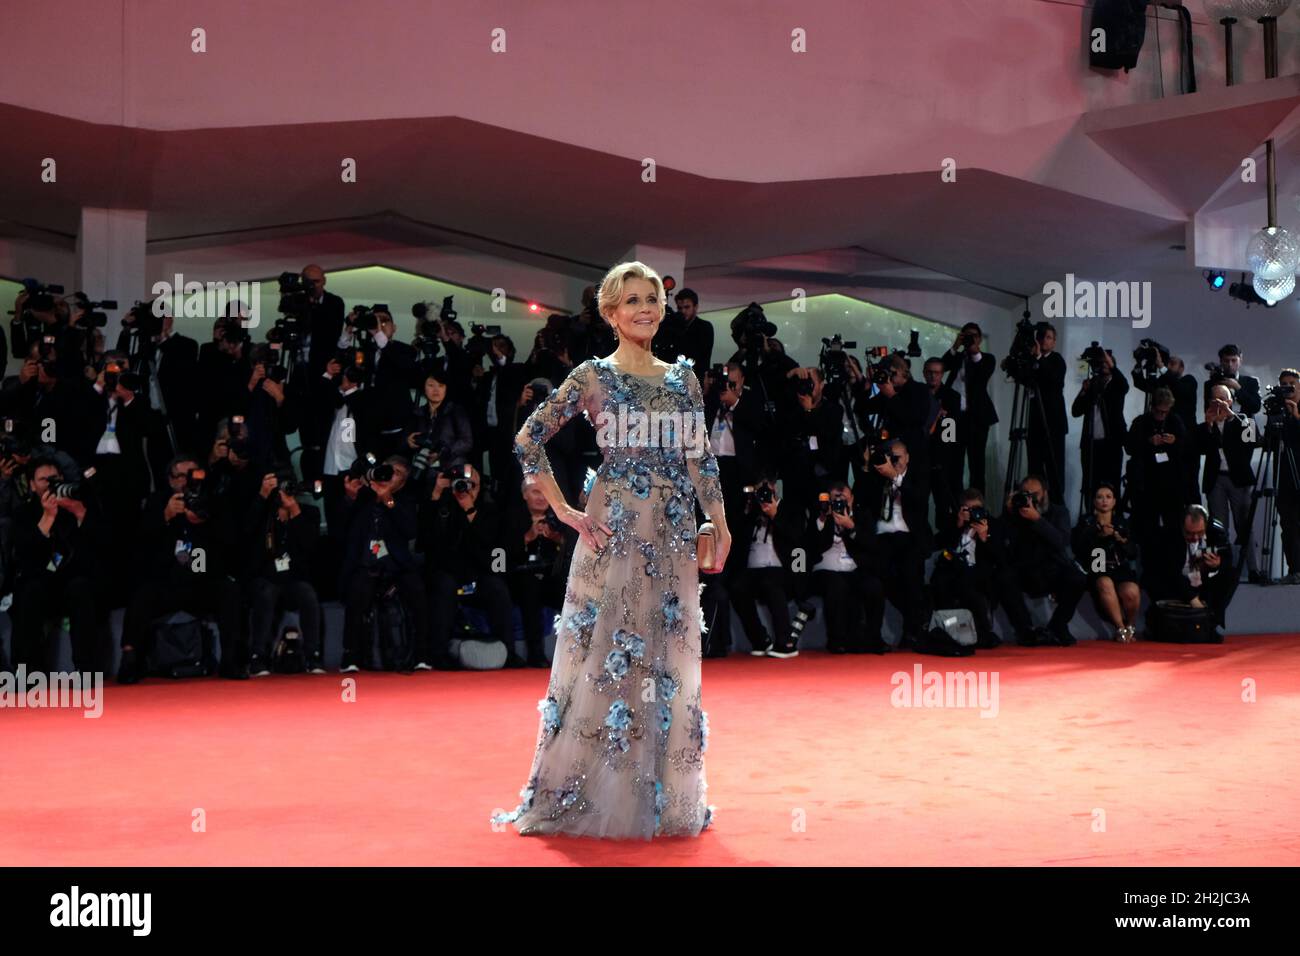 Jane Fonda walks the red carpet ahead of the 'Our Souls At Night' screening during the 74th Venice Film Festival. Venice, Italy, September 01, 2017. ( Stock Photo